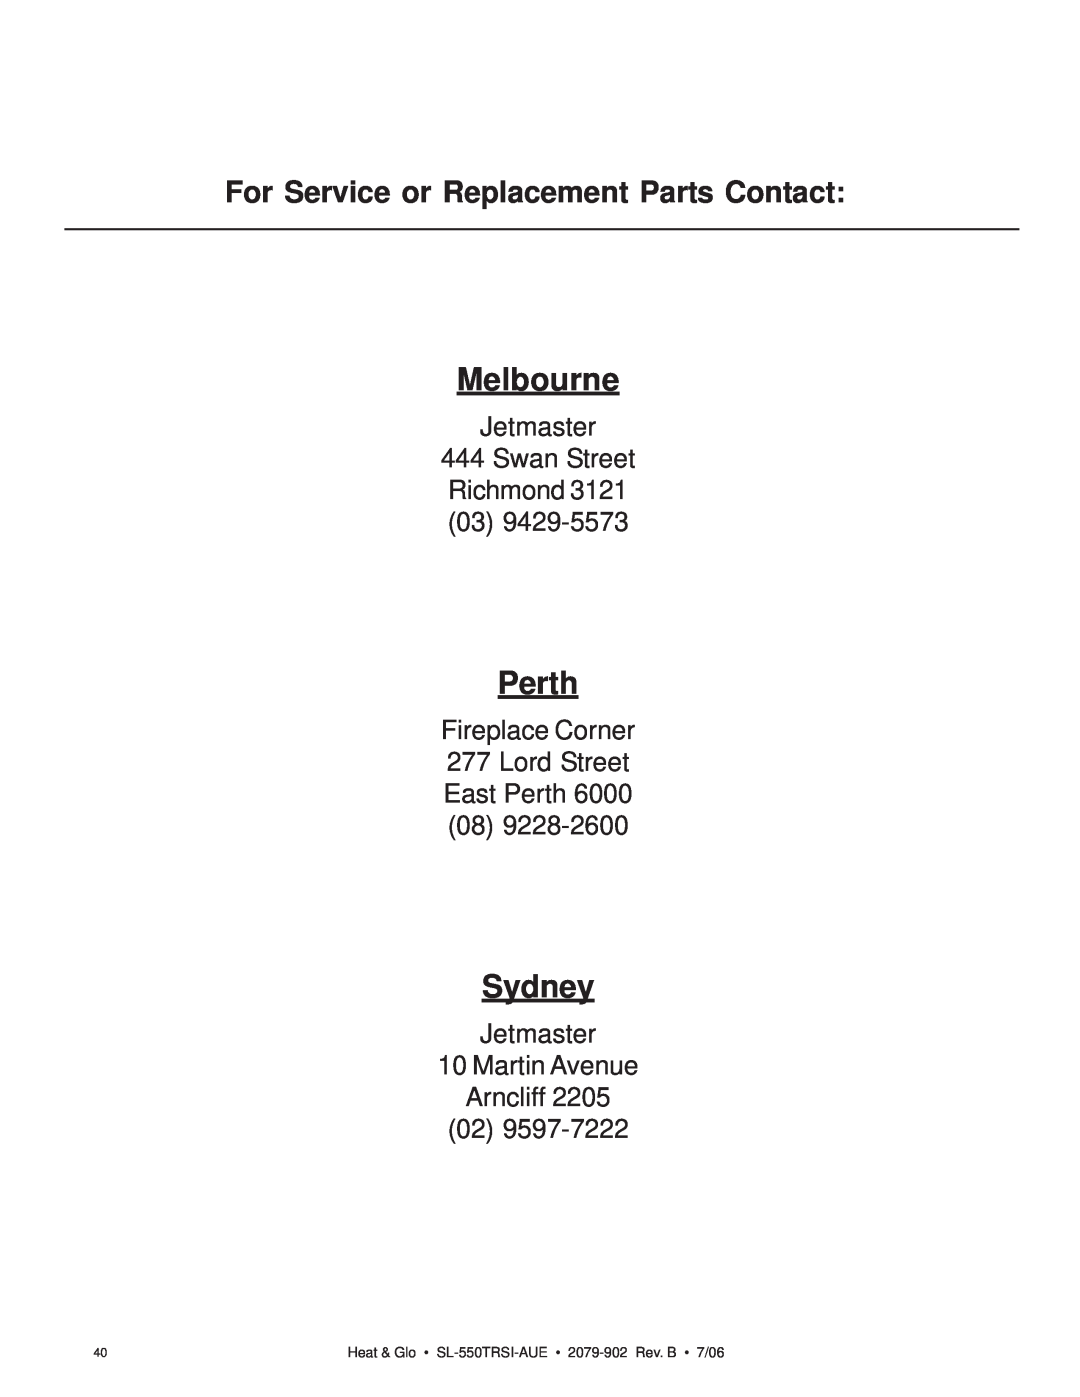 Hearth and Home Technologies SL-550TRSI-AUE manual Melbourne, Perth, Sydney, For Service or Replacement Parts Contact 